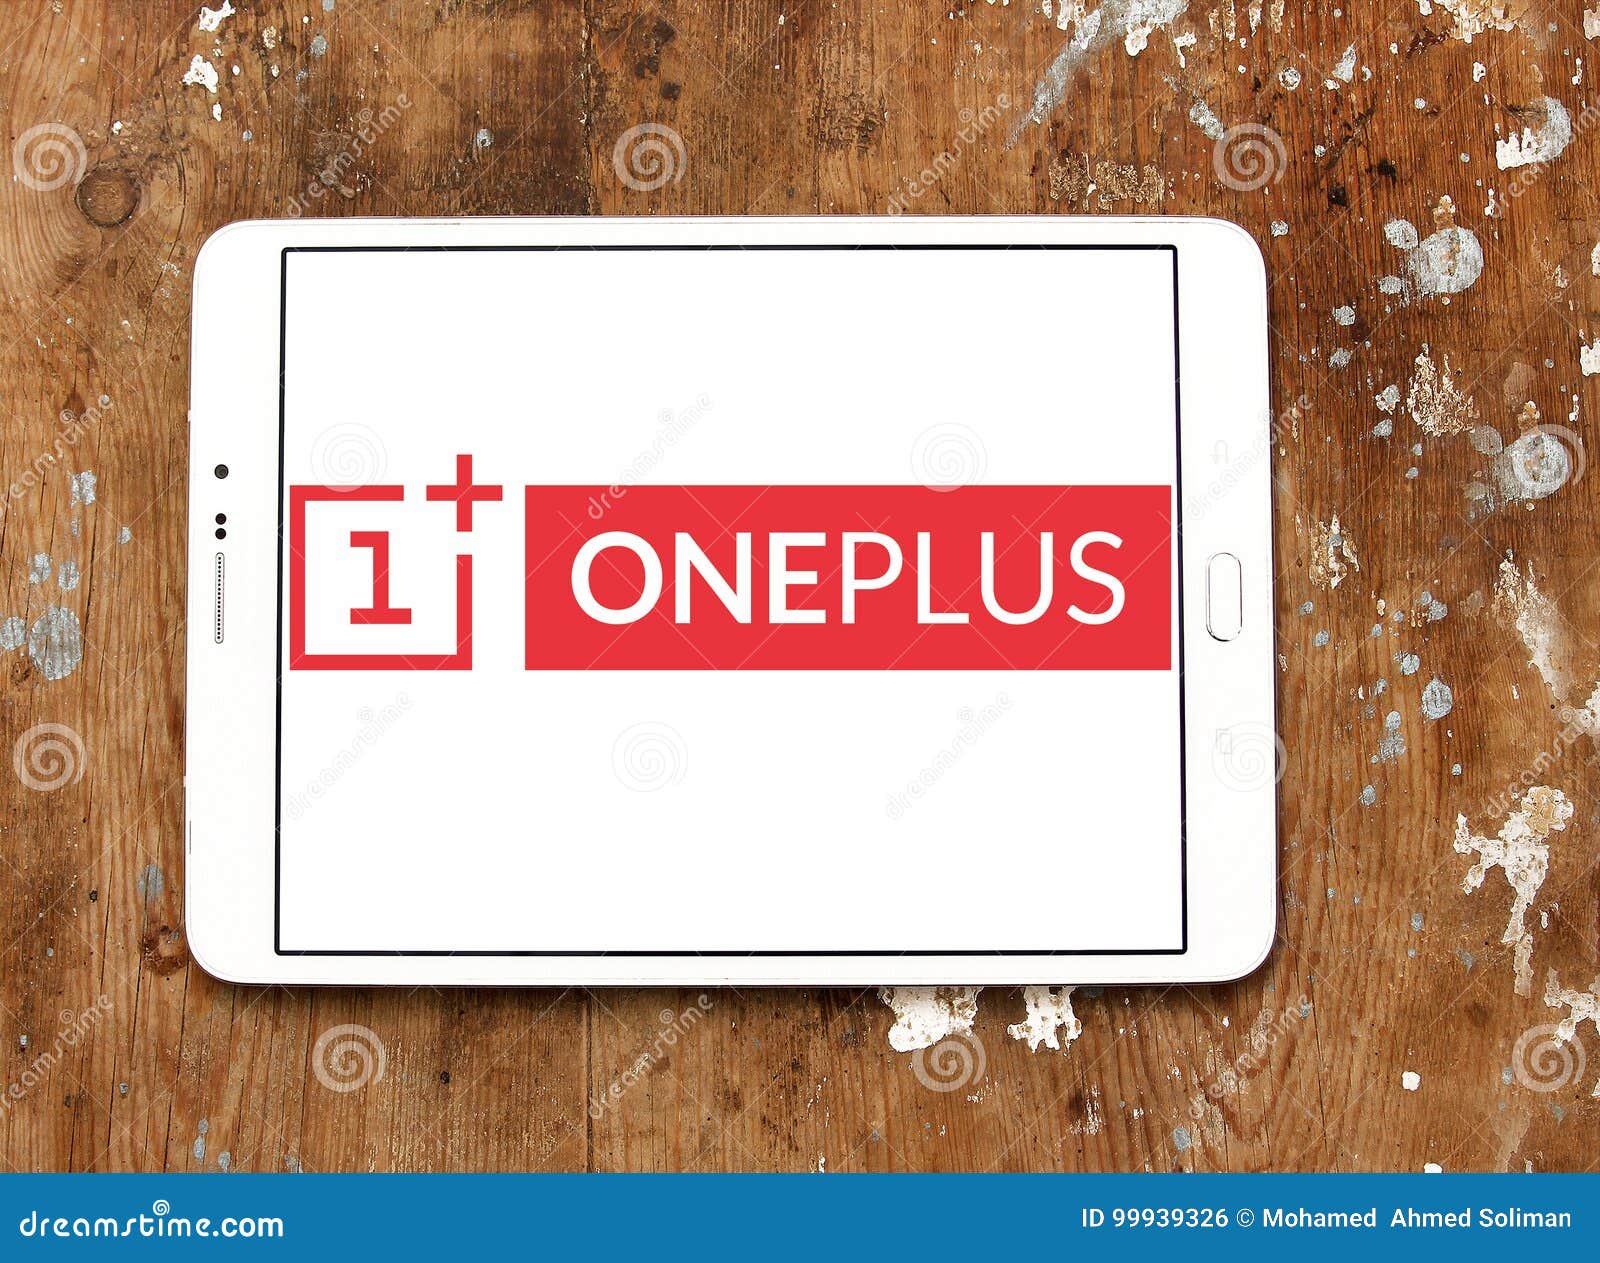 It's official OnePlus and Oppo are gonna release same foldable (only  difference is logo) : r/oneplus